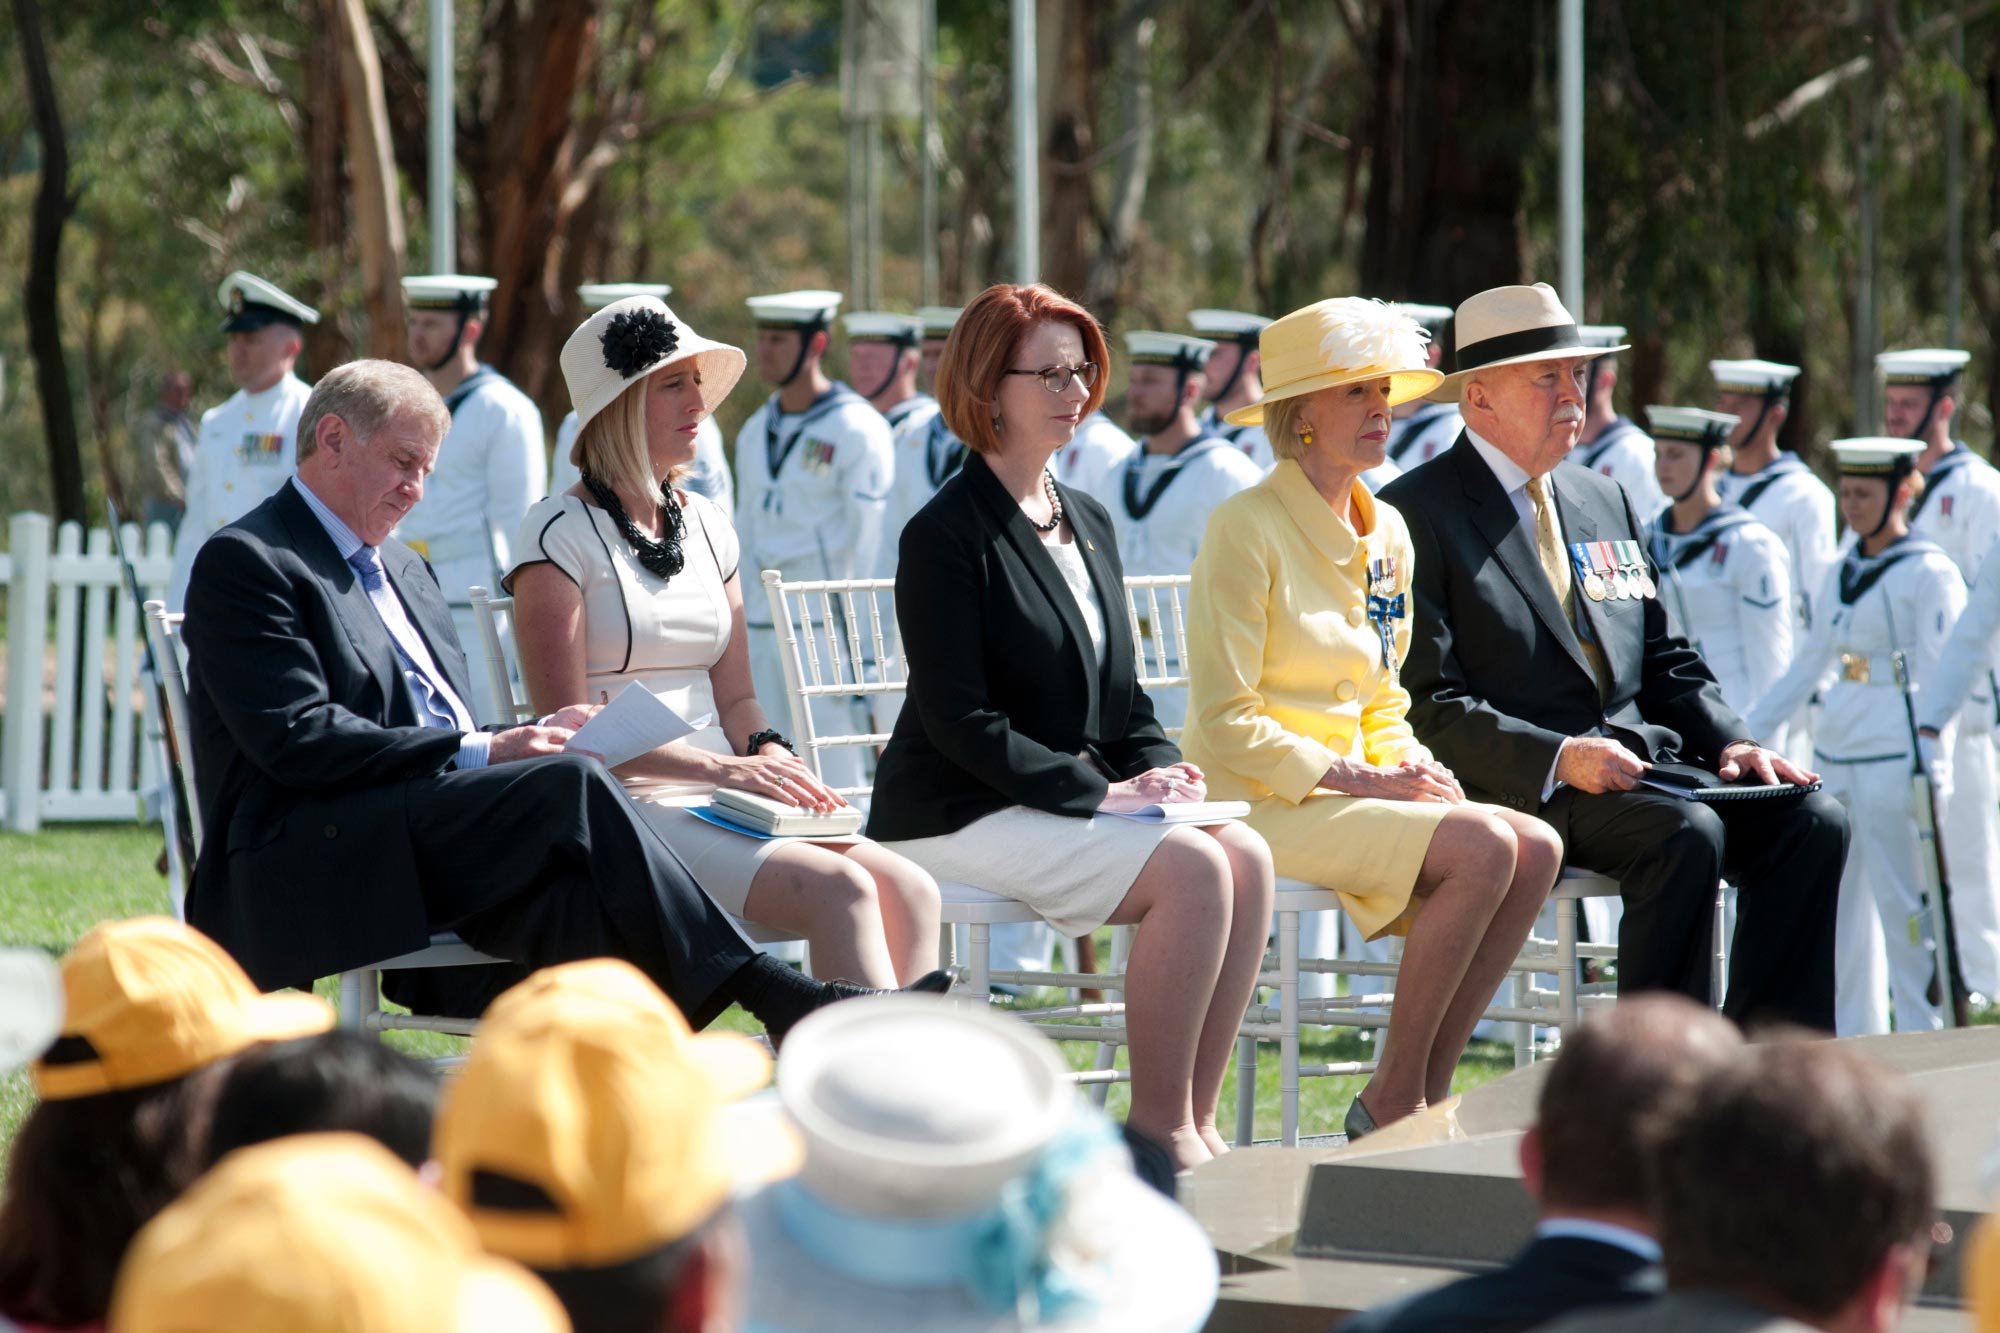 Prime Minister Julia Gillard and Governor-General Ms Quentin Bryce attend centenary of Canberra celebrations, 2013.